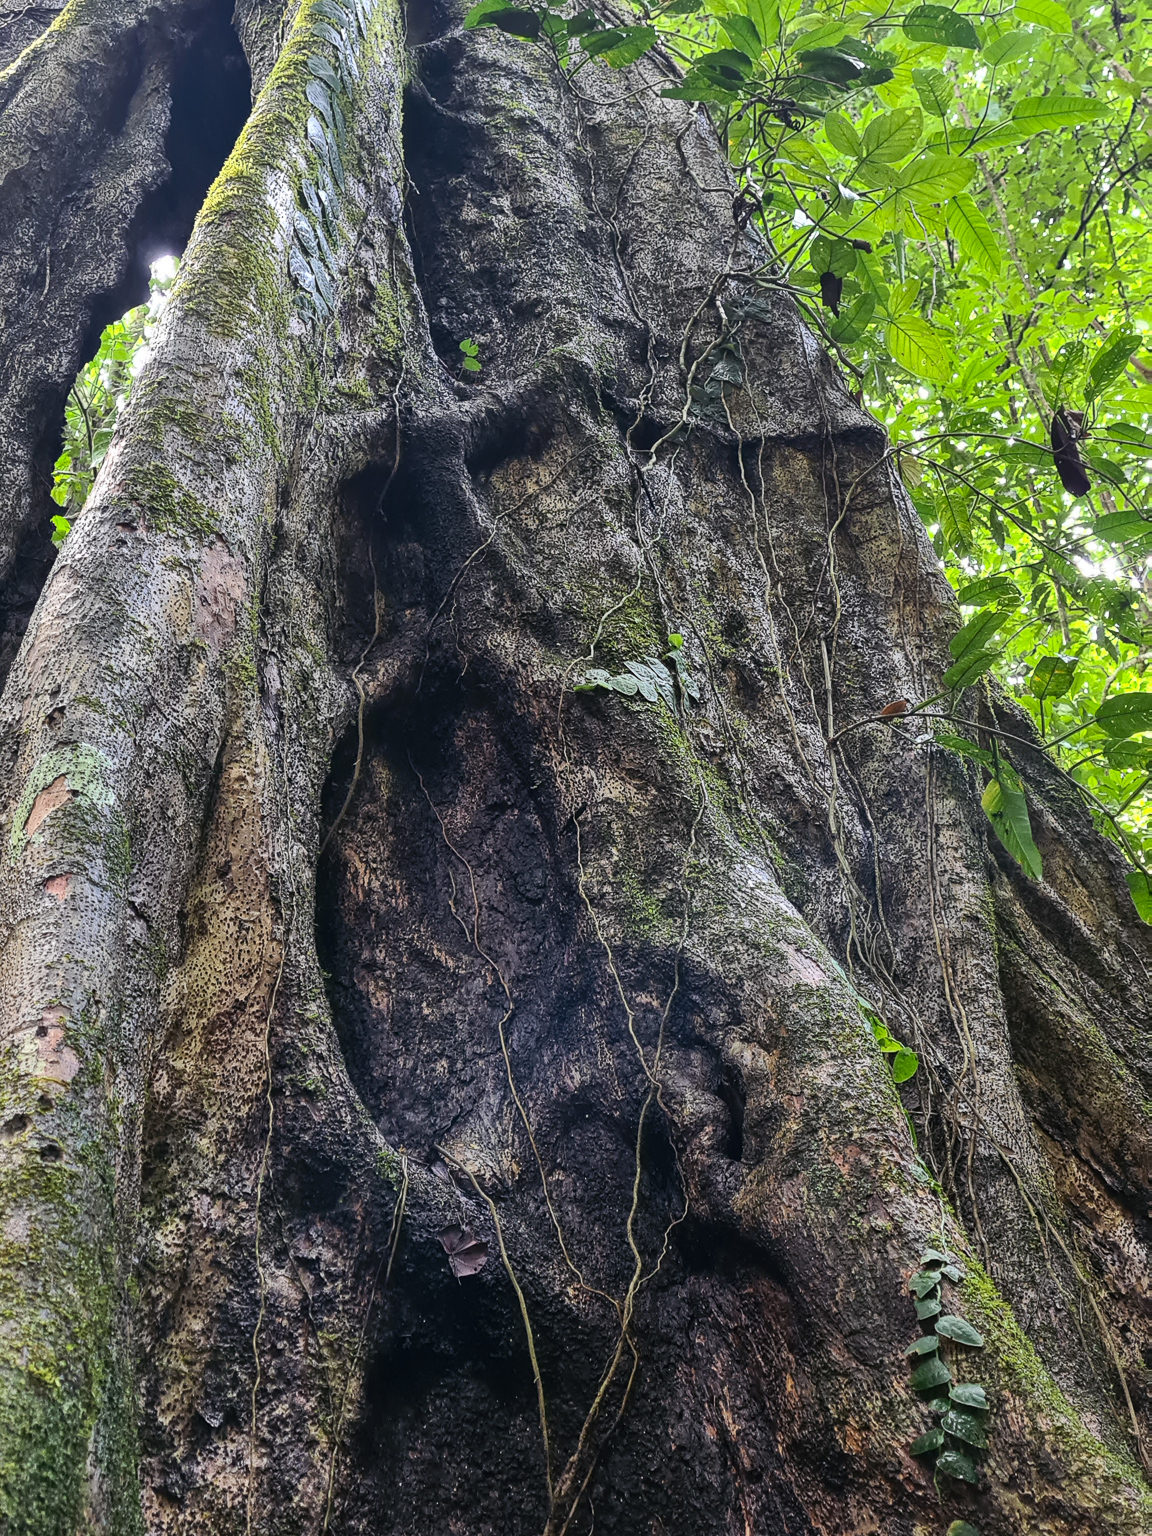 The thick roots of an old tree stand out in the light green forest